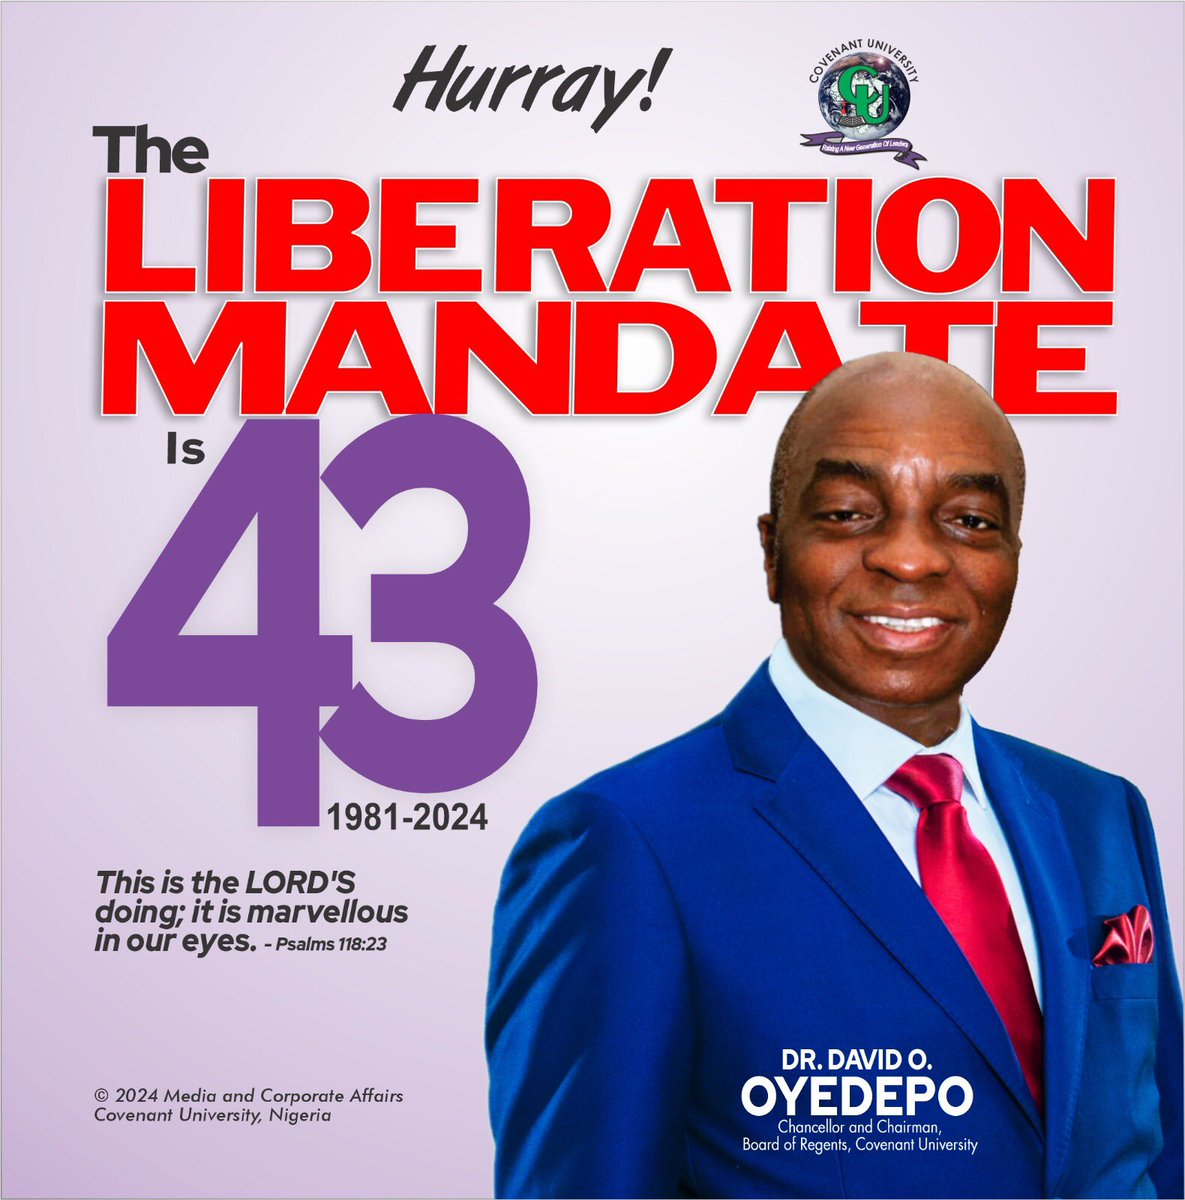 HURRAY! THE LIBERATION MANDATE IS 43! Today makes it 43 great years since the reception of 'The Liberation Mandate’.  We at Covenant University join the Living Faith Church Worldwide and the global Christian community to celebrate this 43rd Anniversary of an astounding legacy.